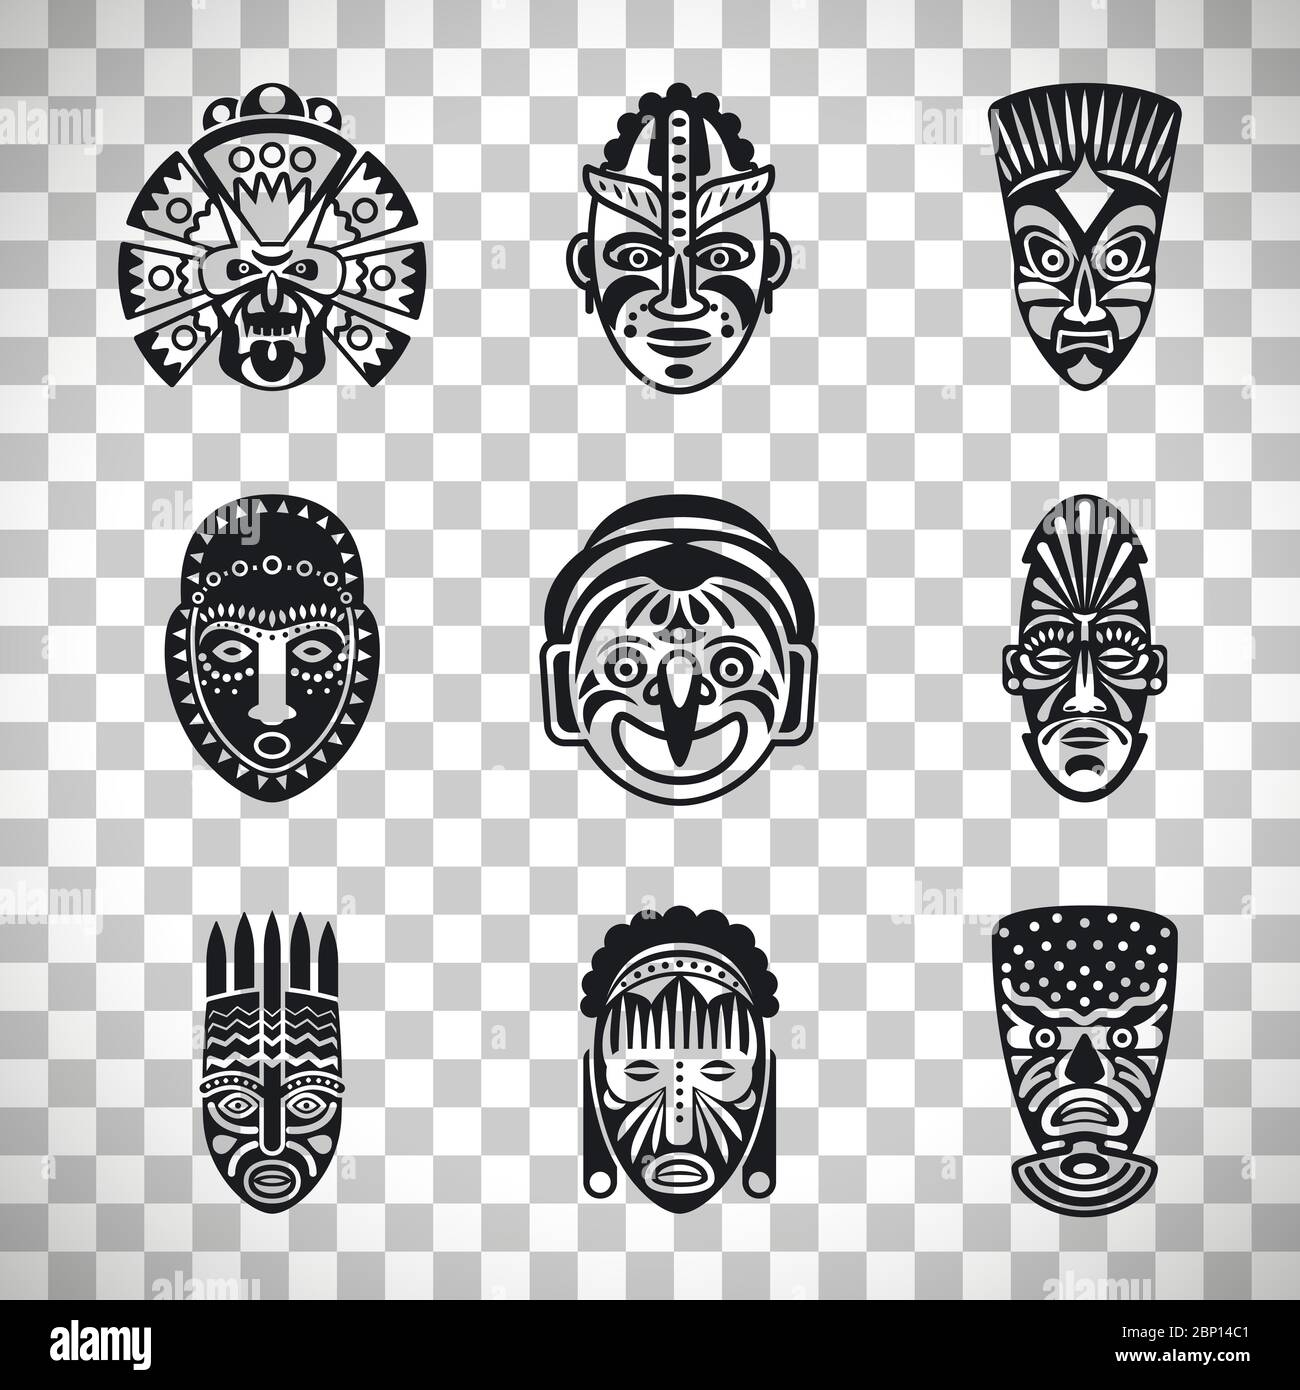 Tribal mask icons, ethnic masks vector isolated on transparent background Stock Vector